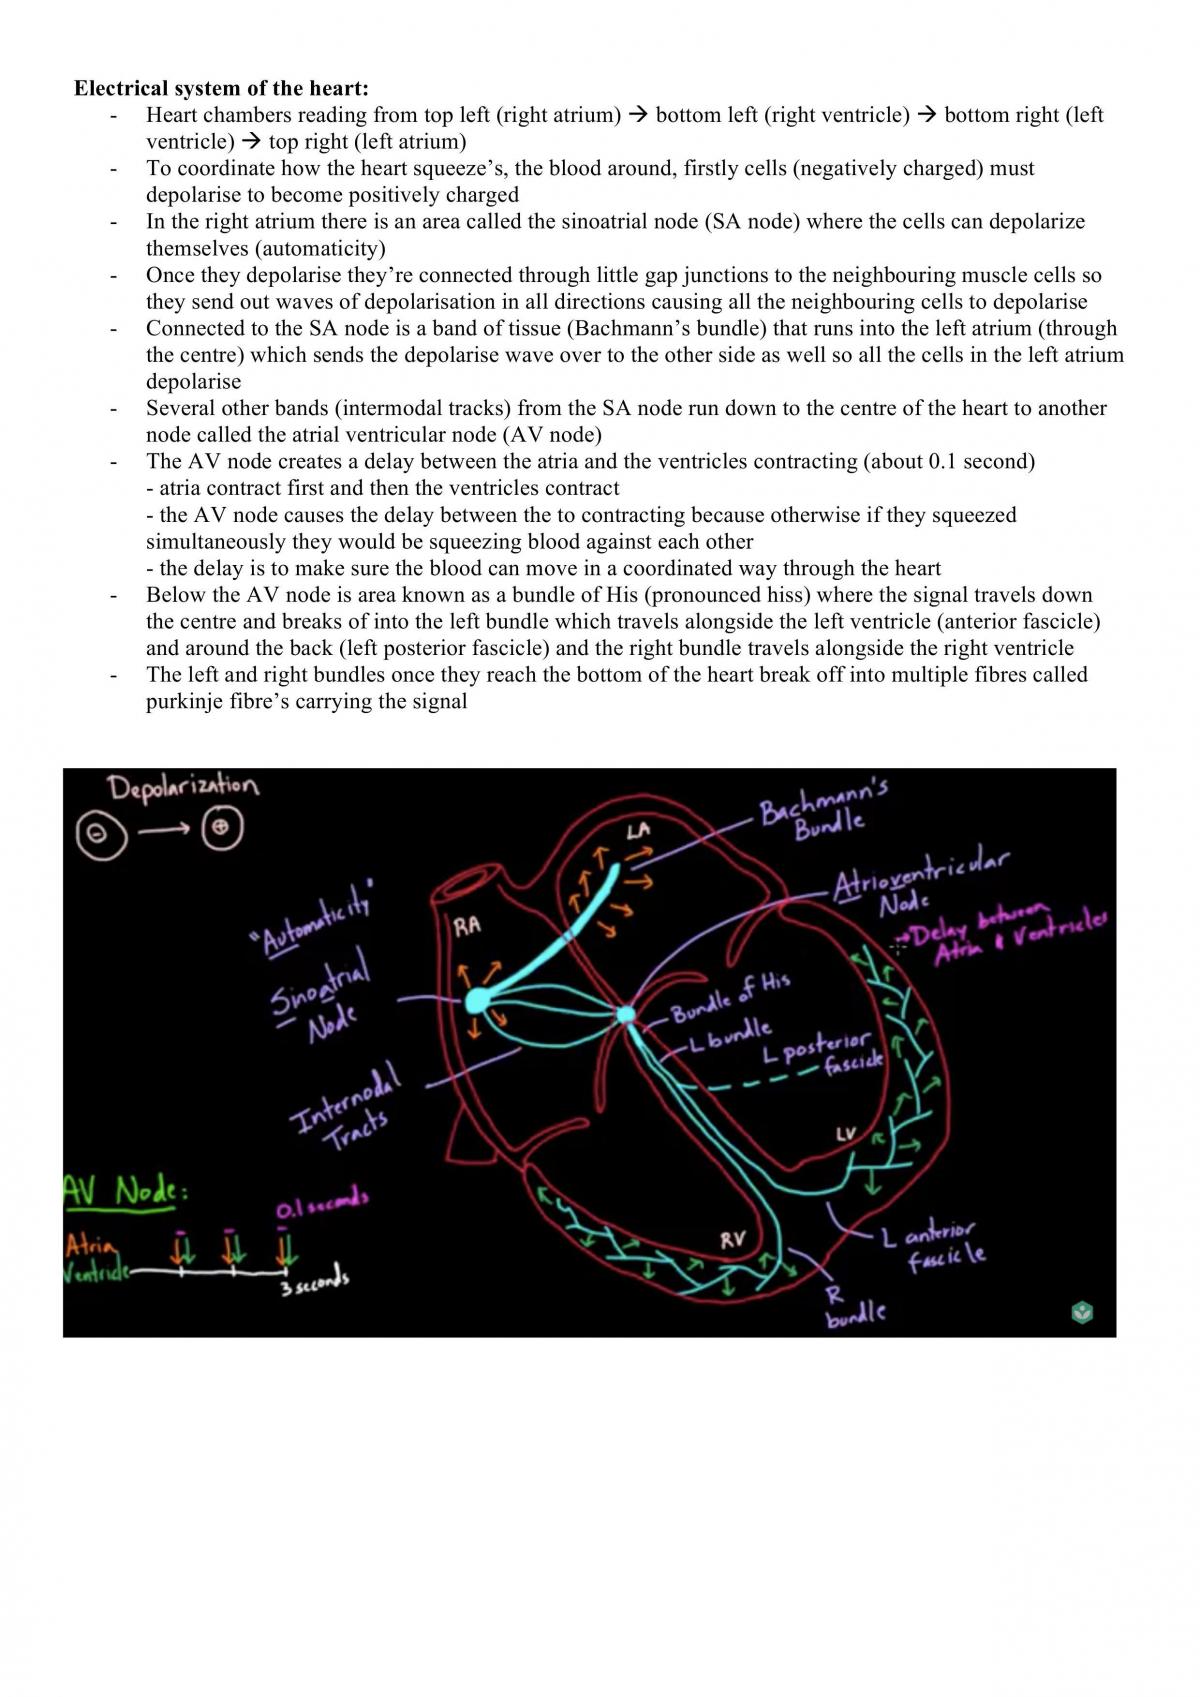 HNN227 Exam Notes - Page 18